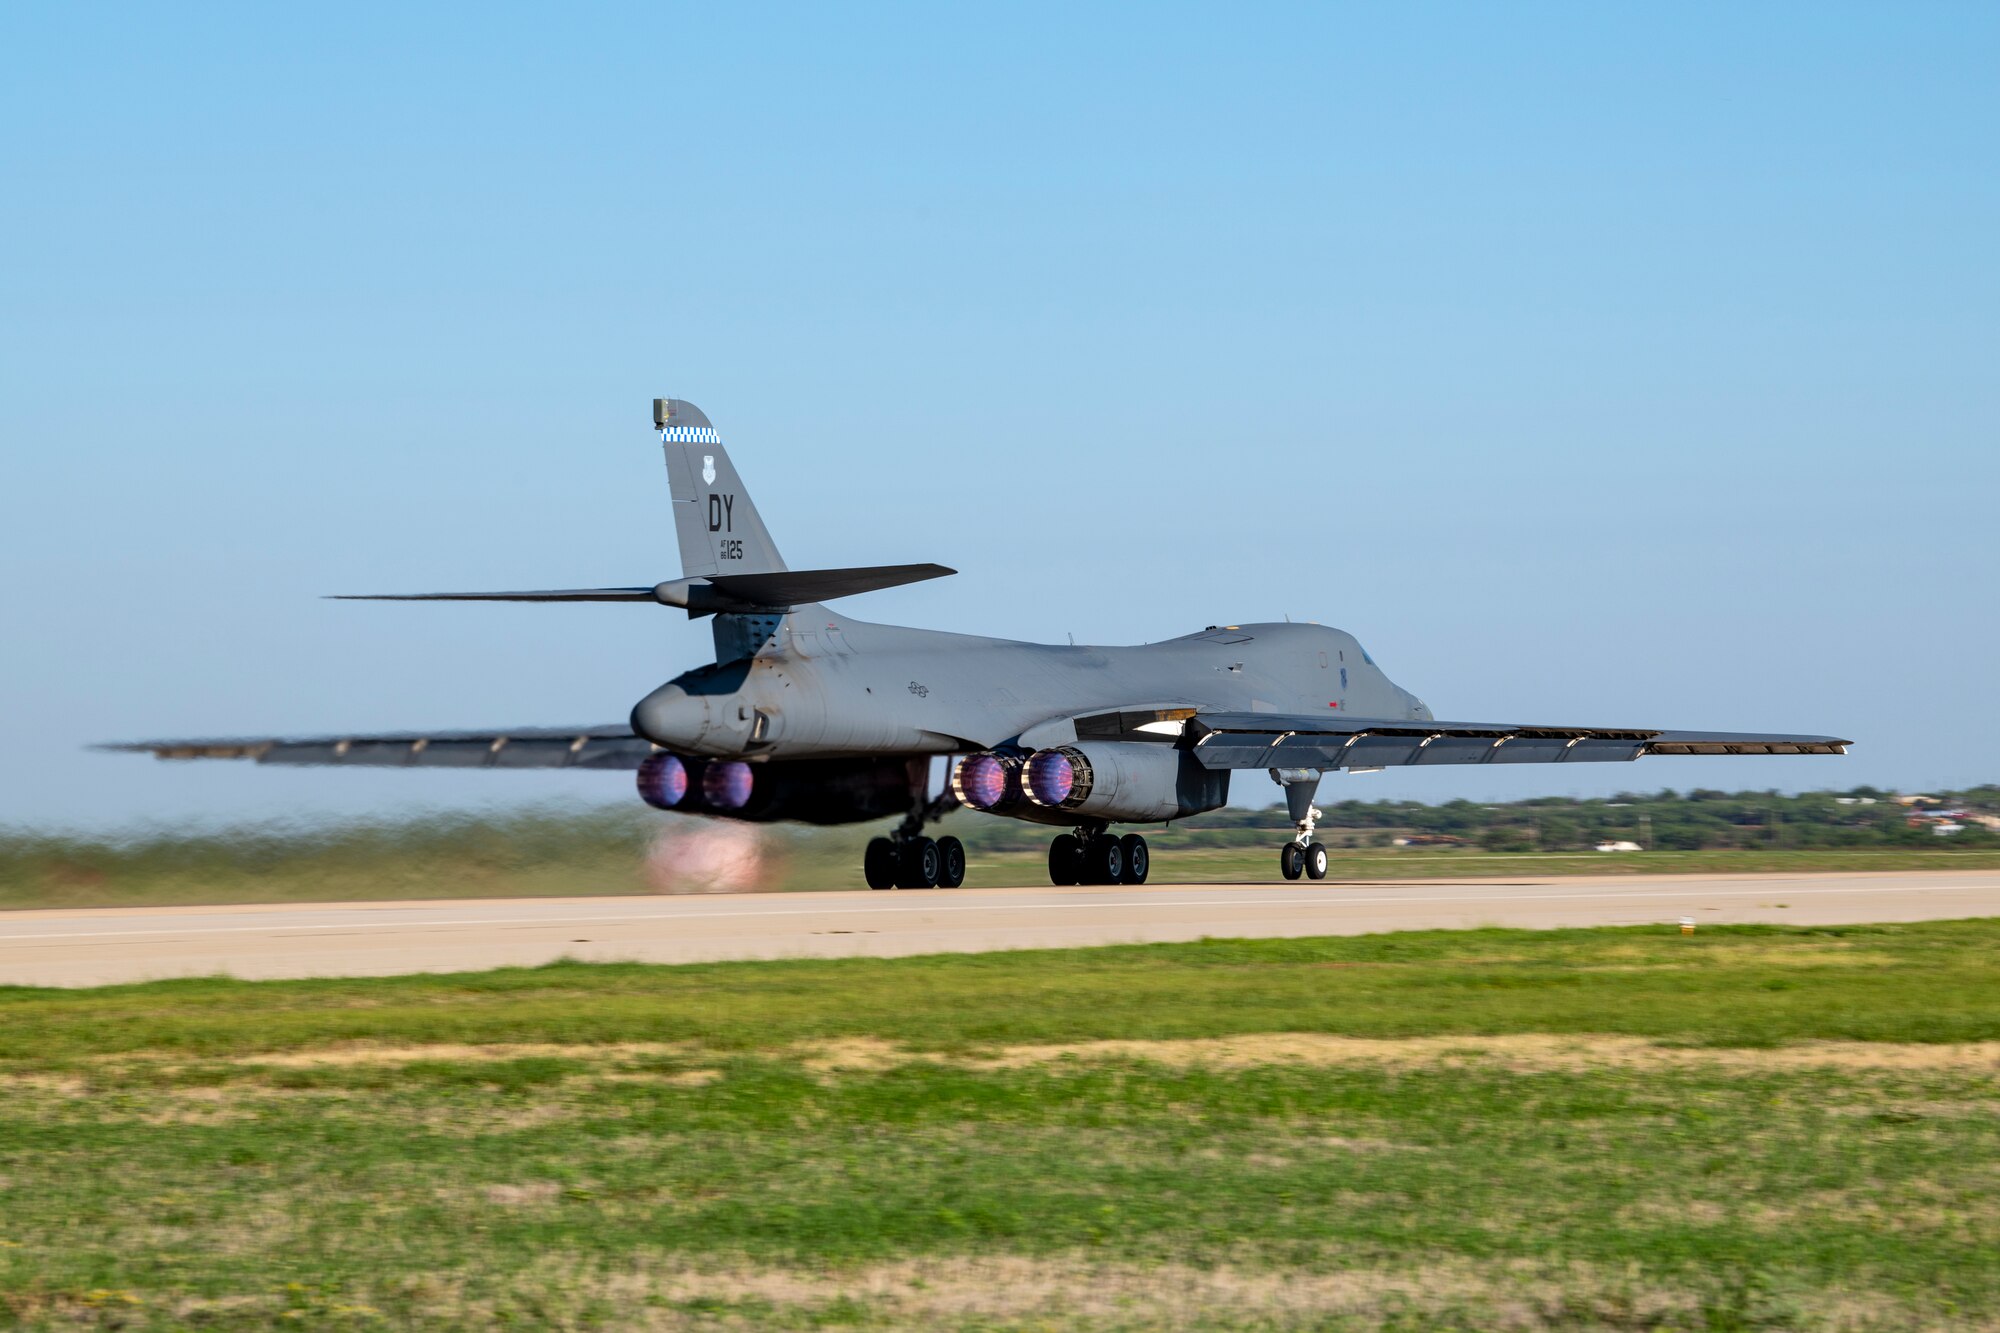 A B-1B Lancer takes off from the flightline at Dyess Air Force Base, Texas Sept. 7th, 2022, for a Bomber Task Force mission to U.S. Southern Command. This mission is representative of the United States’ commitment to our partners to maintain regional security and stability while enabling units to become familiar with operations in different regions. (U.S. Air Force photo by Senior Airman Mercedes Porter)